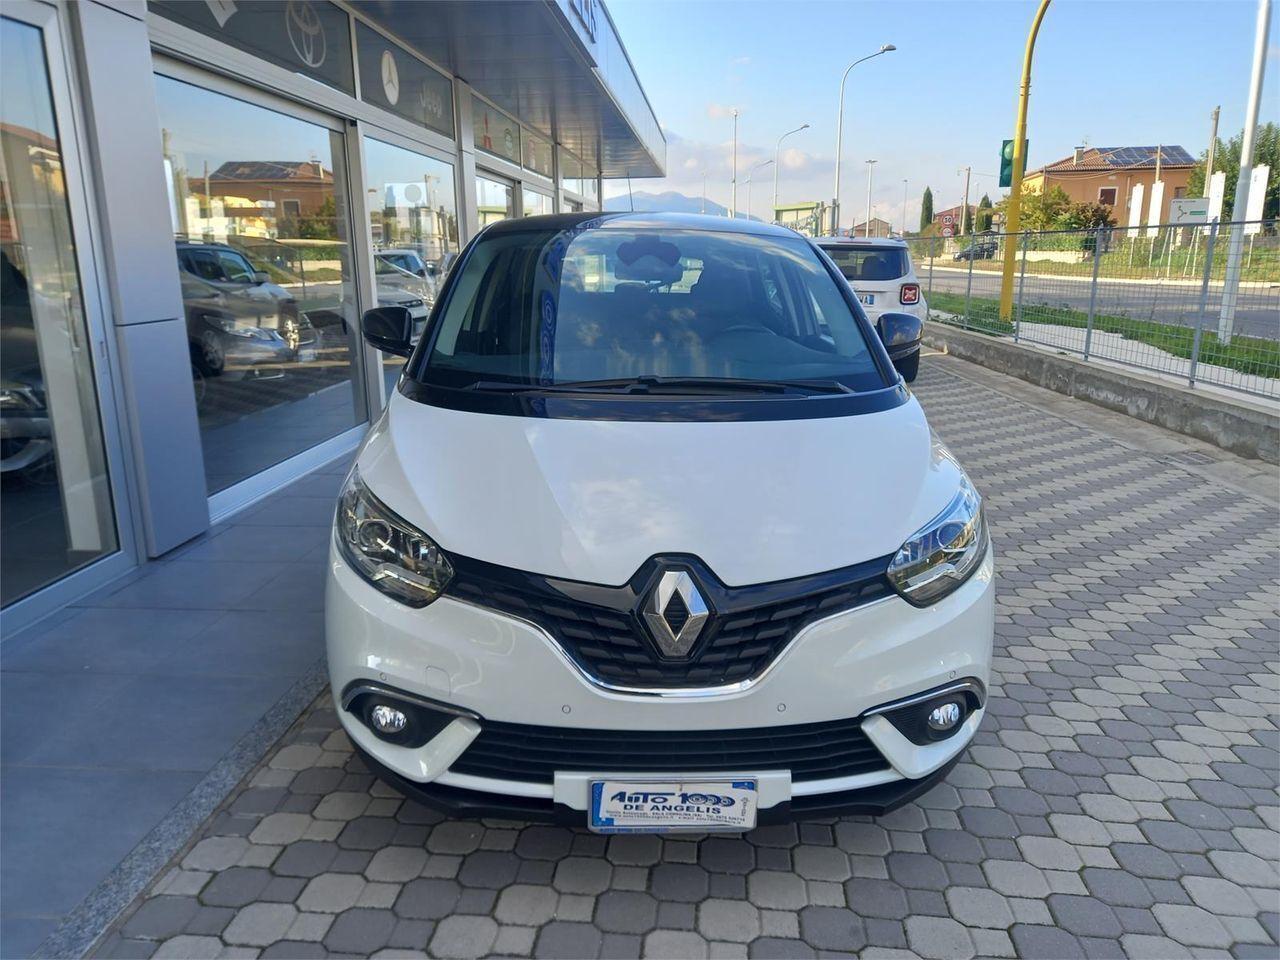 Renault Scenic 1.7 BLUE dCi *** SPORT EDITION *** 120 CV MANUALE